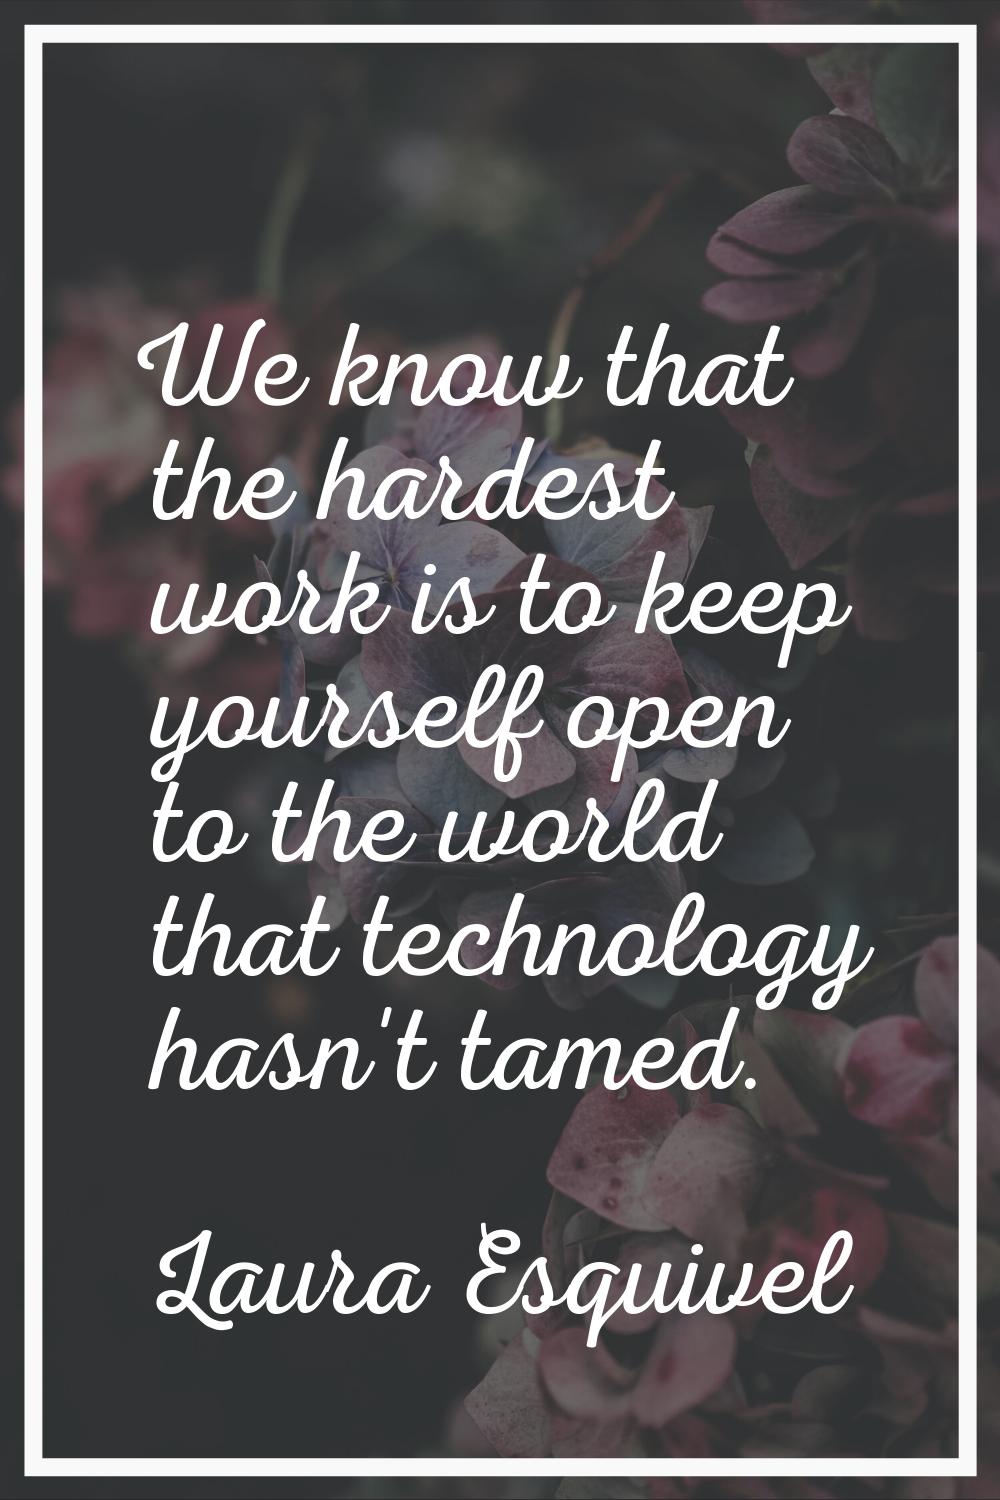 We know that the hardest work is to keep yourself open to the world that technology hasn't tamed.